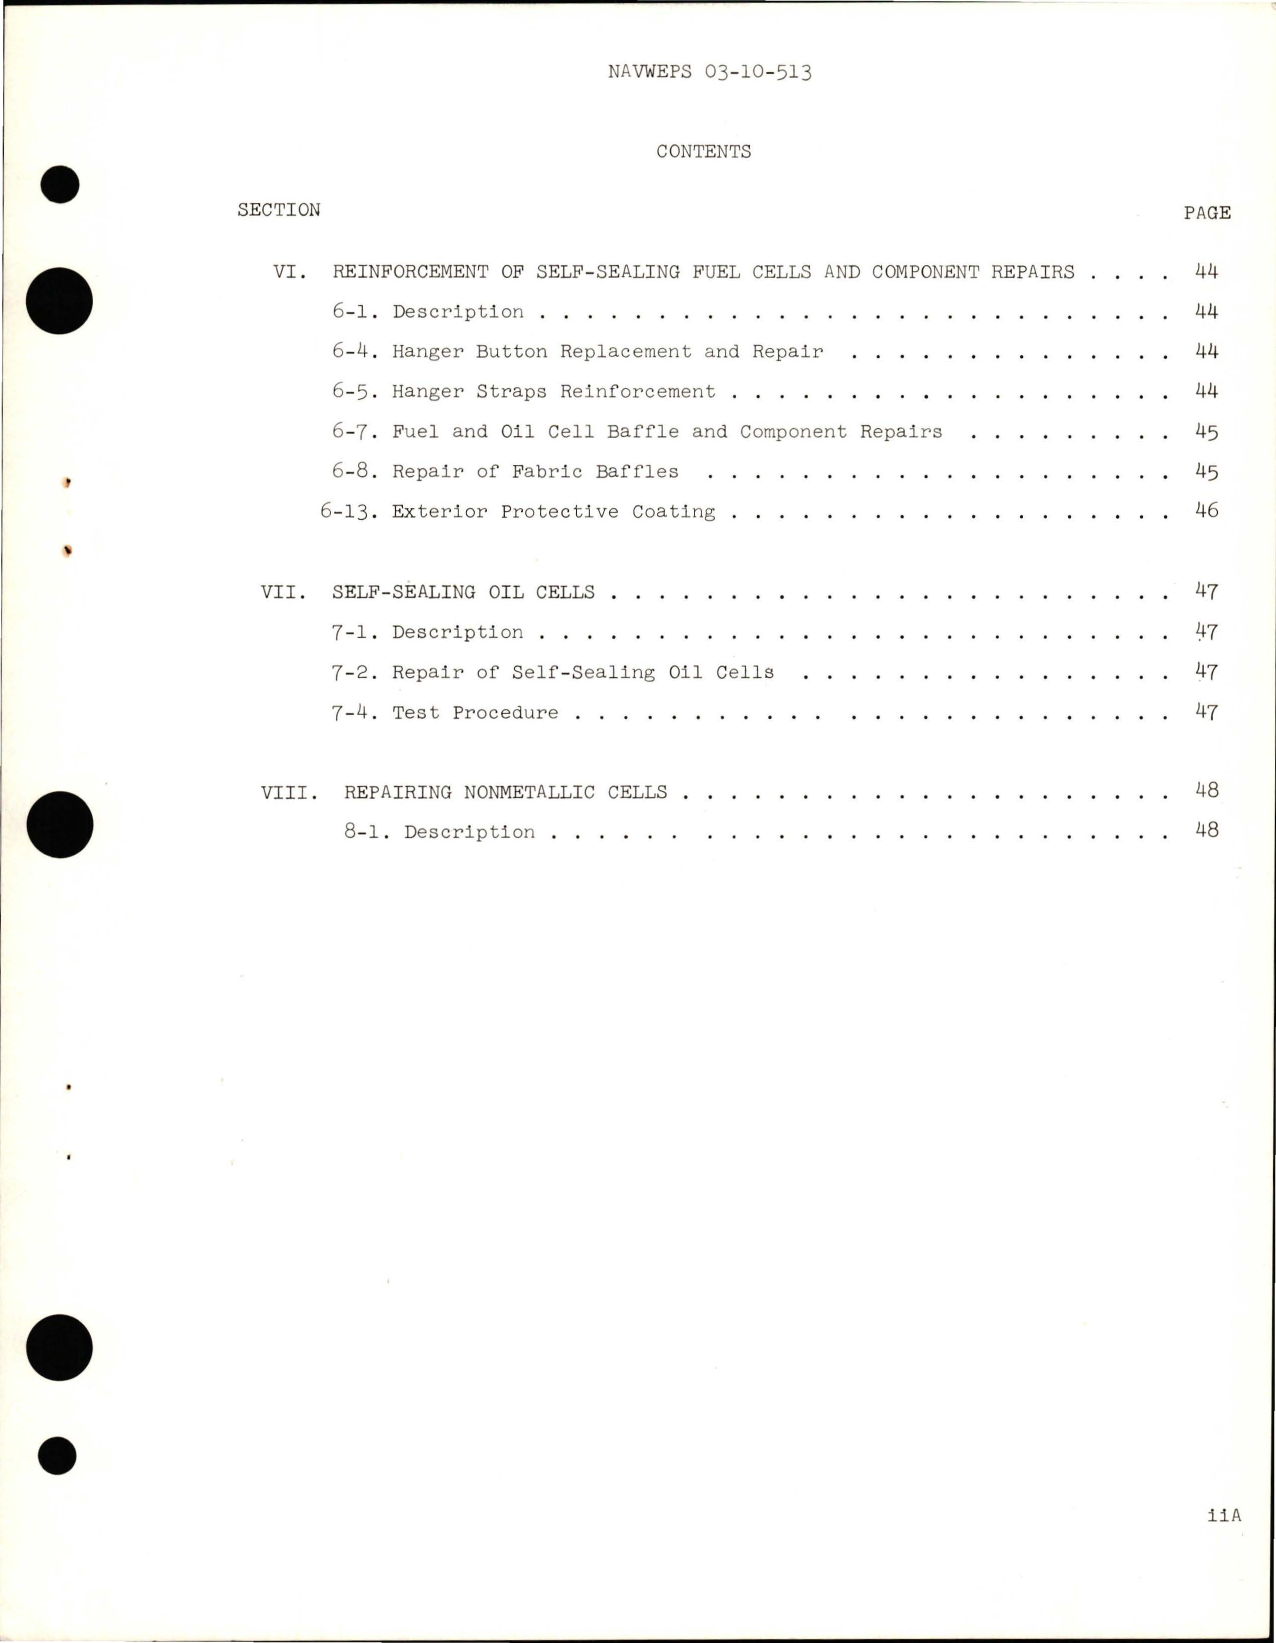 Sample page 5 from AirCorps Library document: Maintenance Instructions for Self-Sealing and Bladder Type Fuel, Oil & Water Alcohol Cells